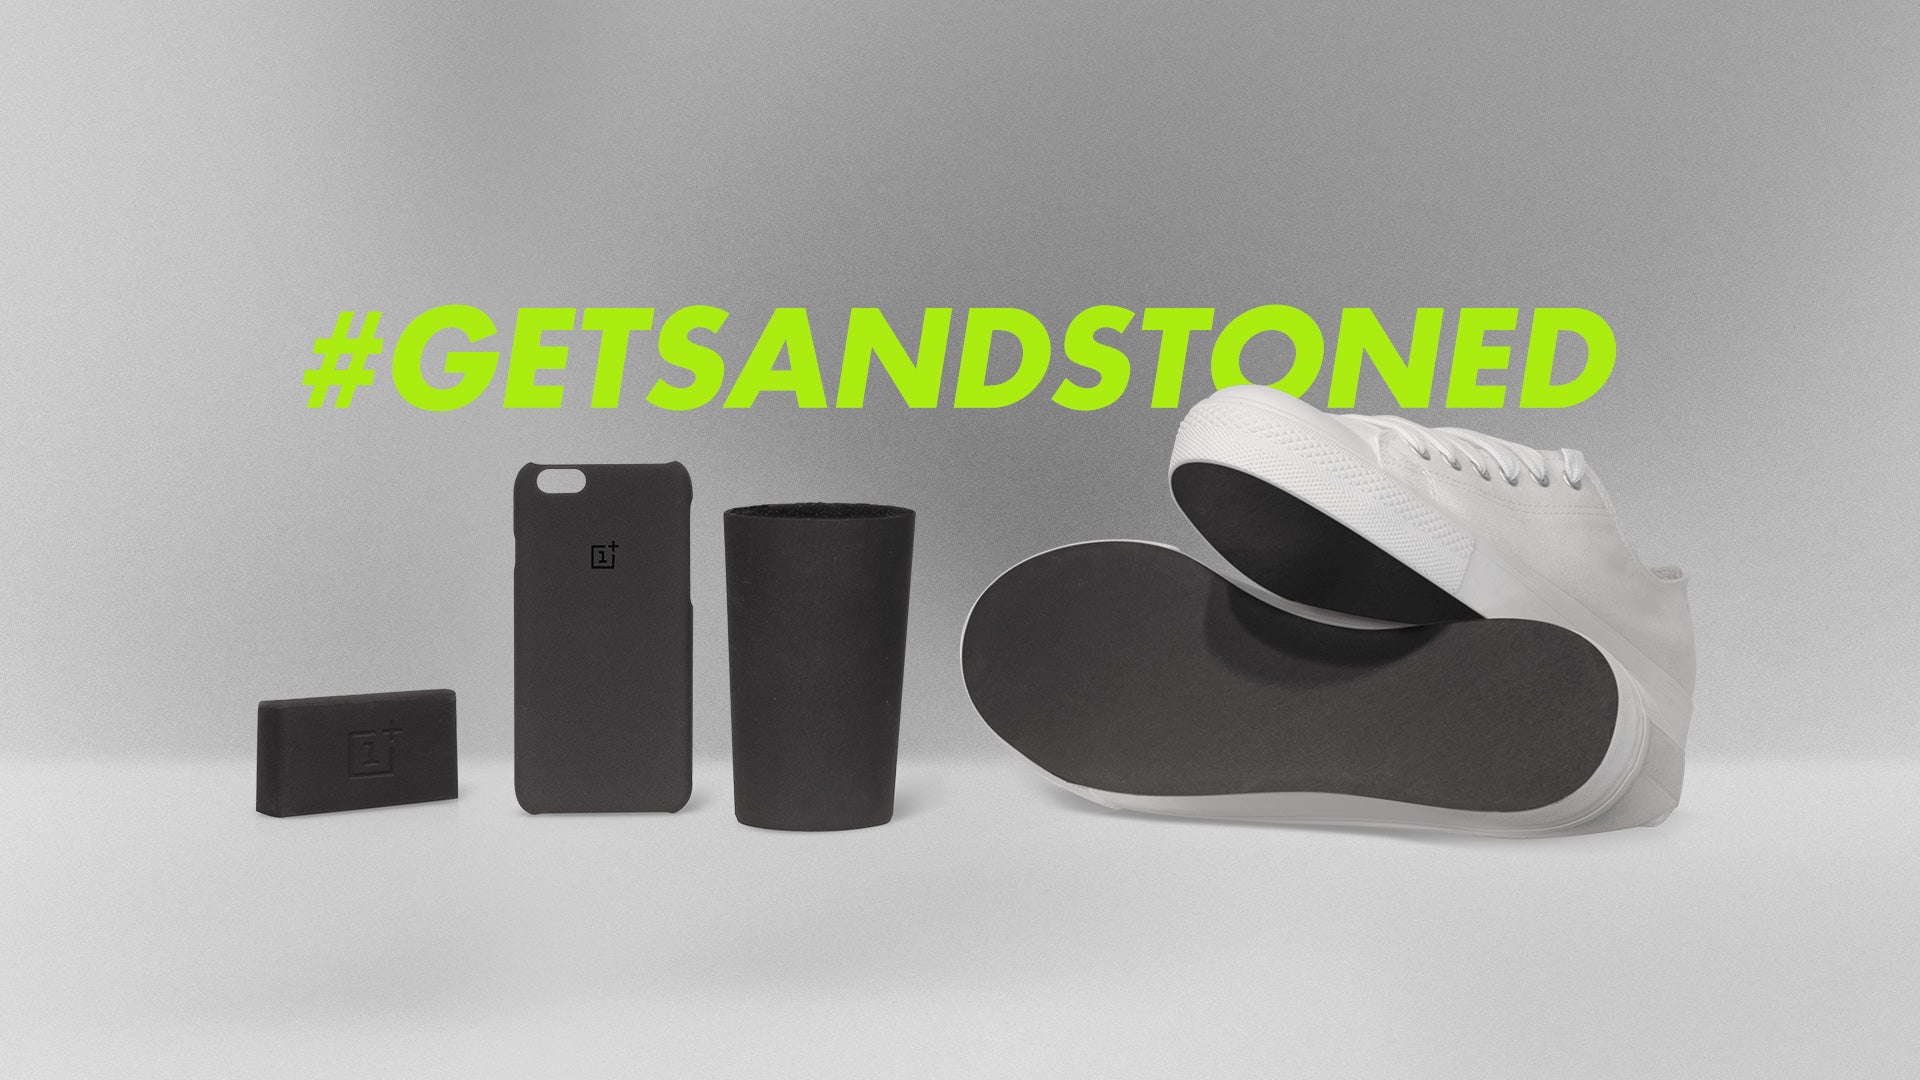 OnePlus goes on an anti-slip crusade, gives Sandstone finish to soaps and sneakers